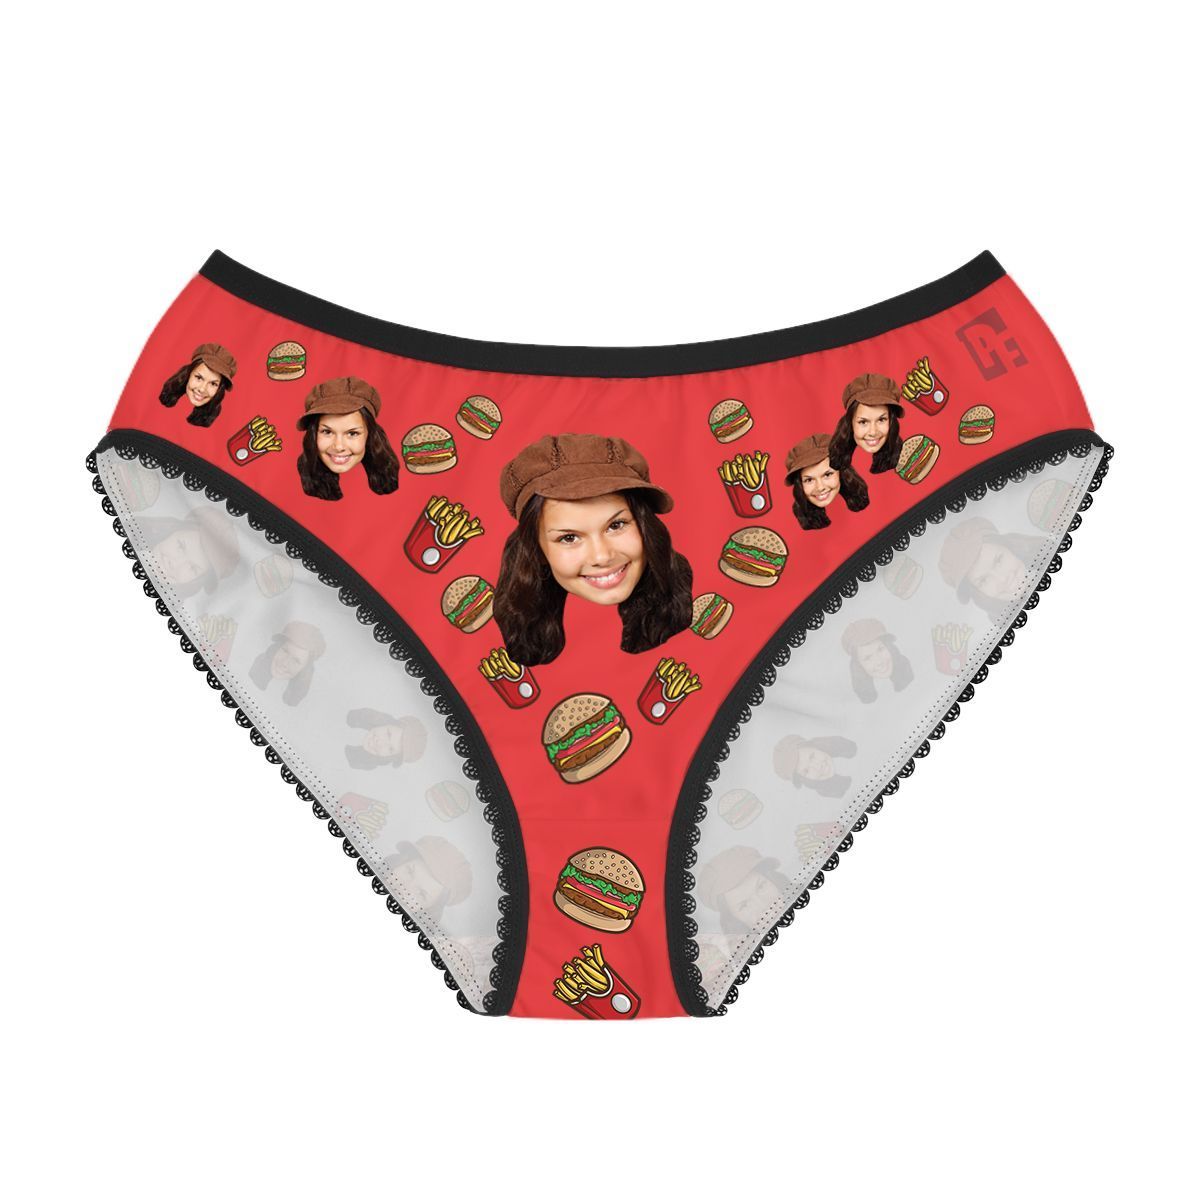 Red Fastfood women's underwear briefs personalized with photo printed on them